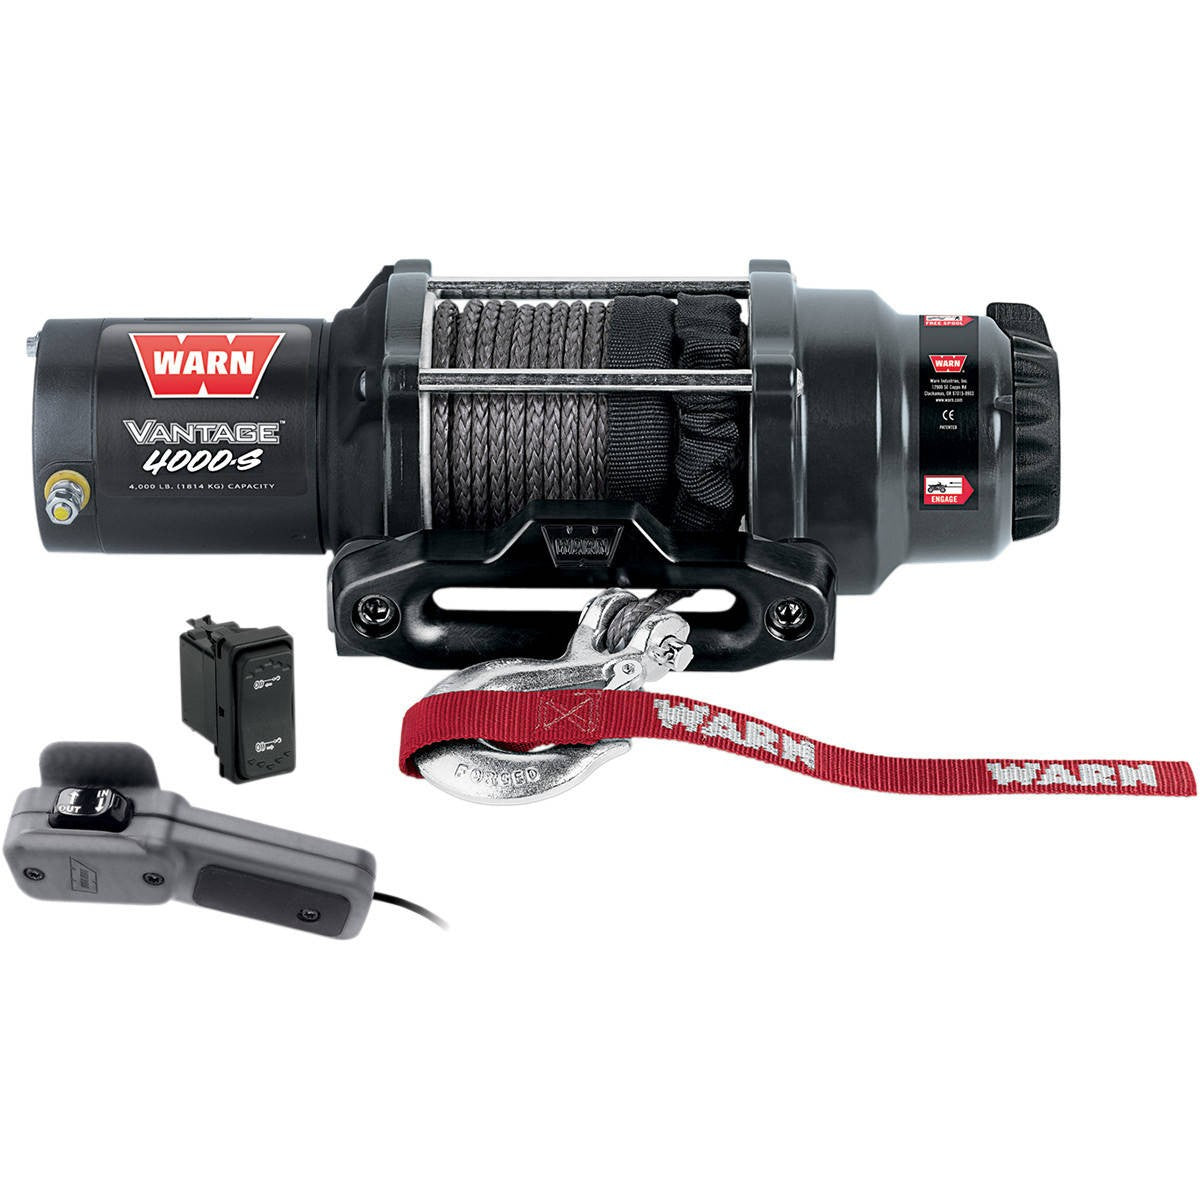 Warn Vantage 4000-lb Winch with Synthetic Rope - PeakBoys